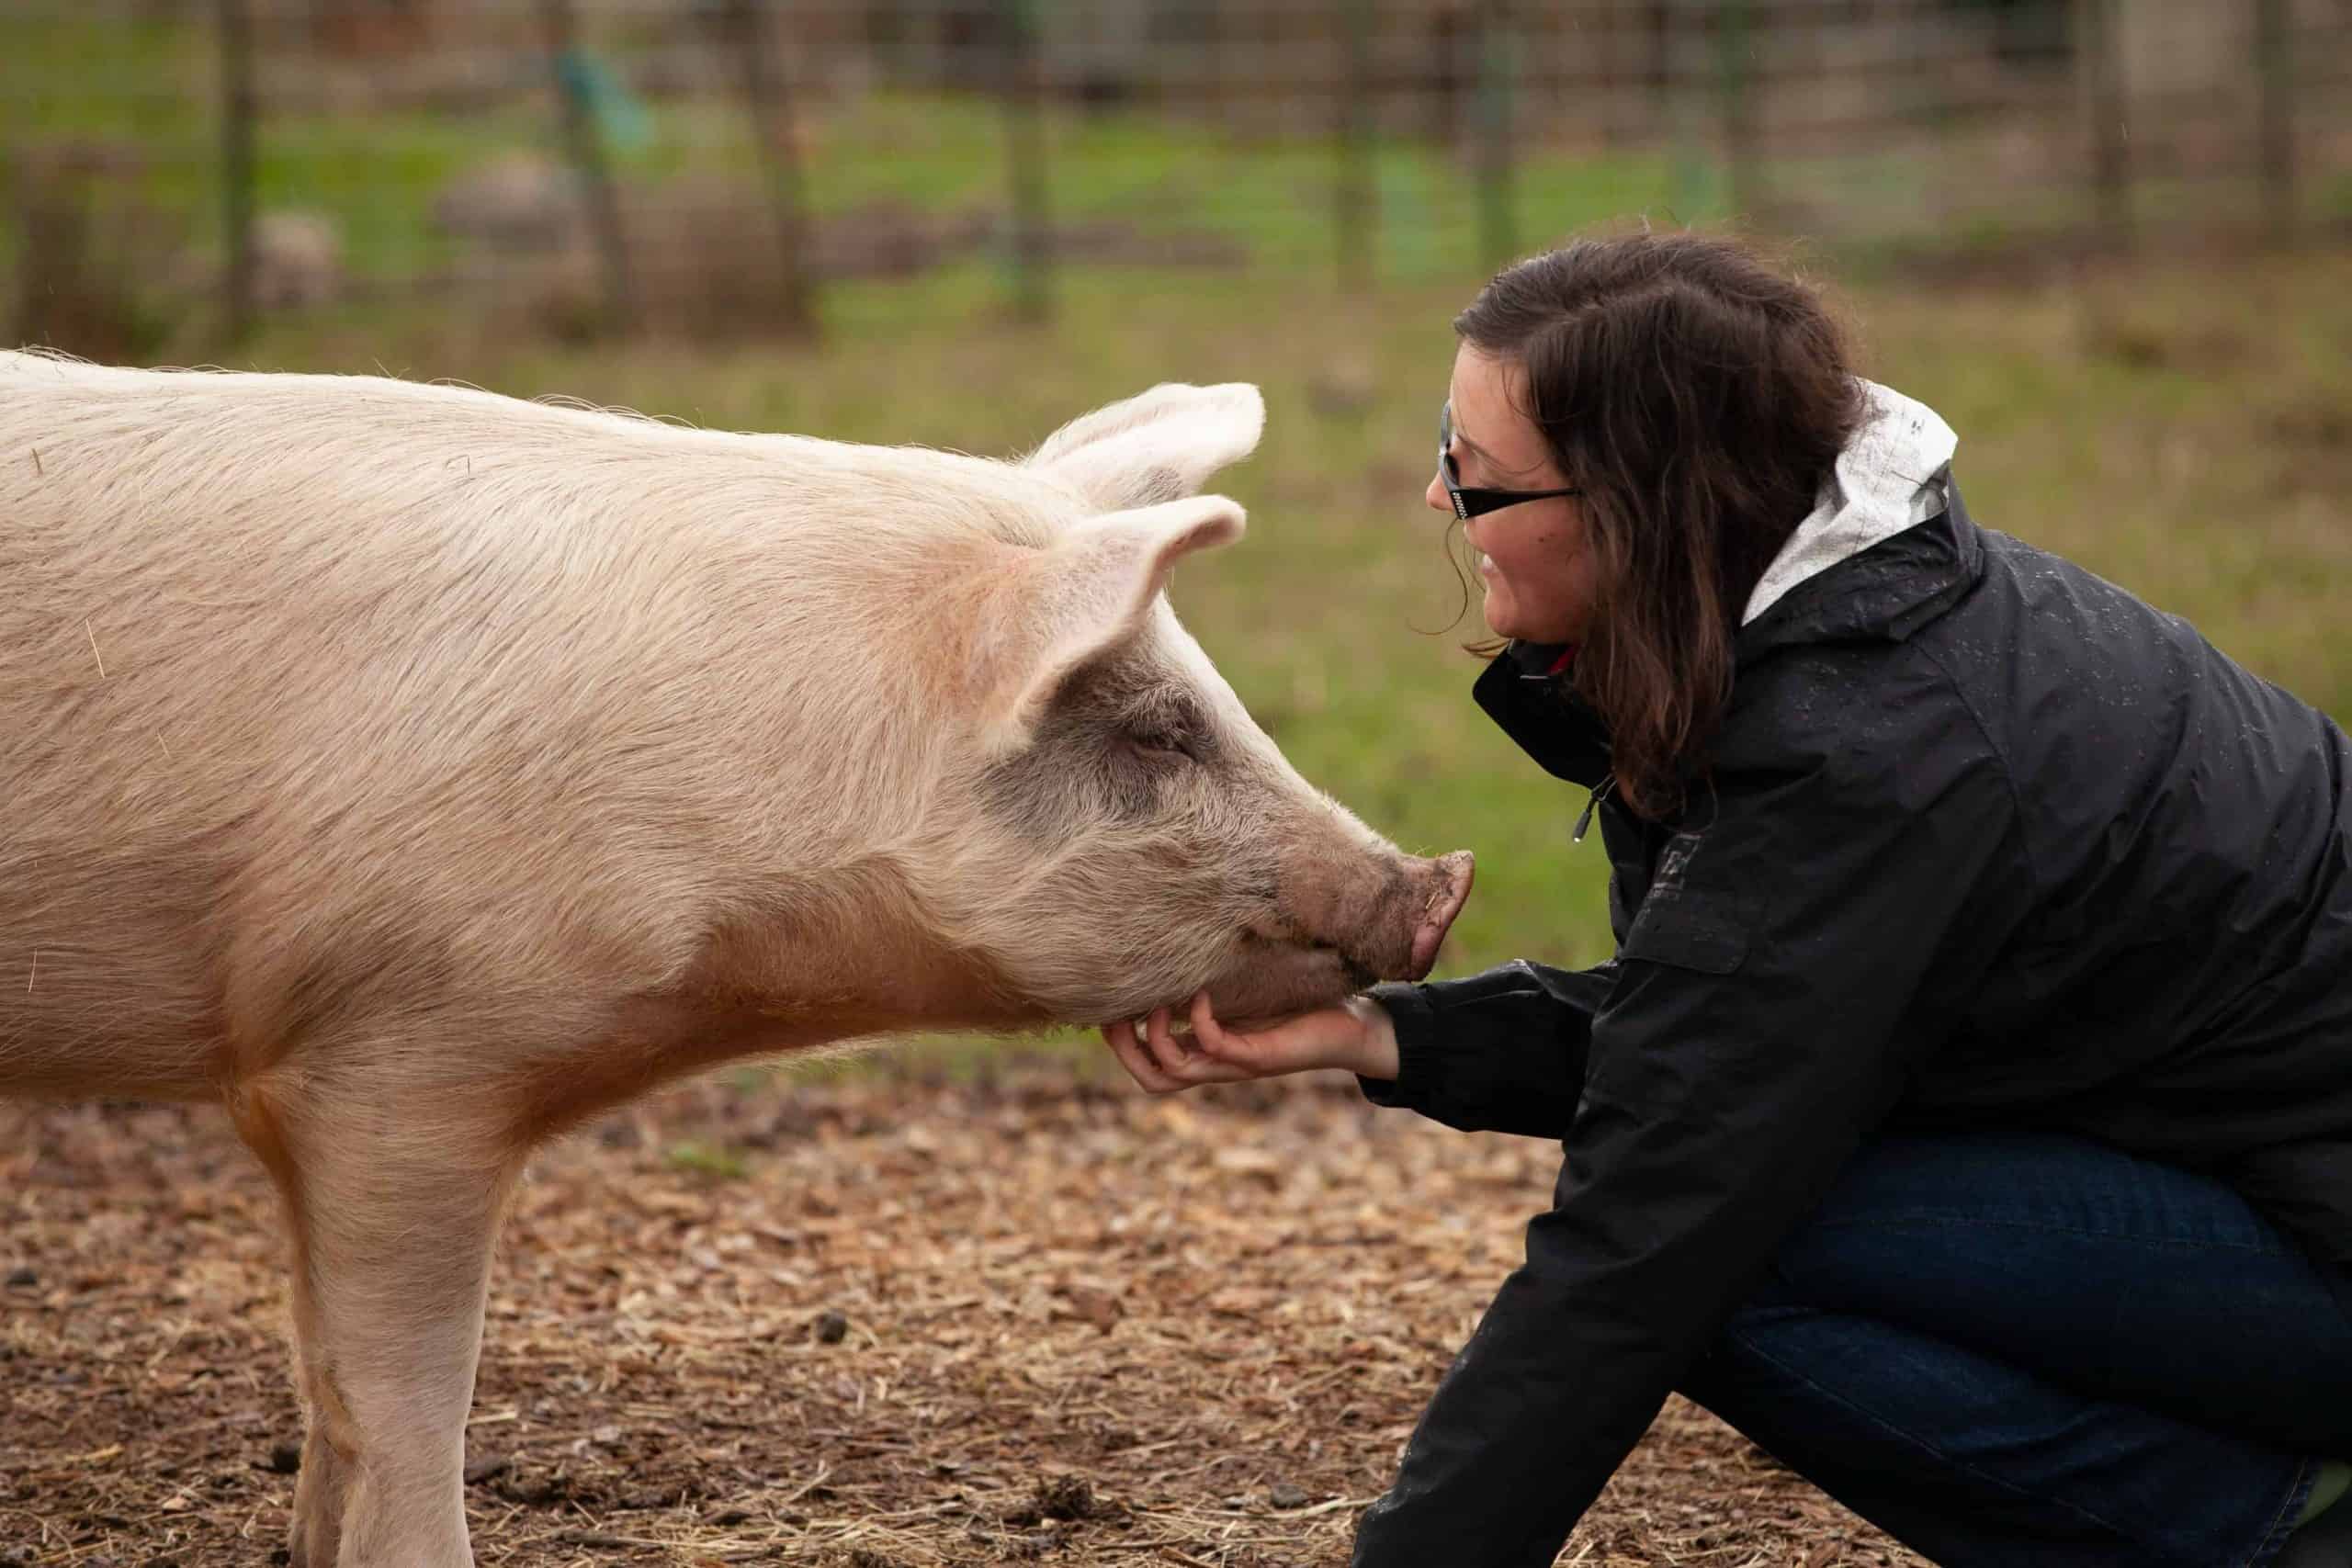 A human scratching a pig's chin outside.